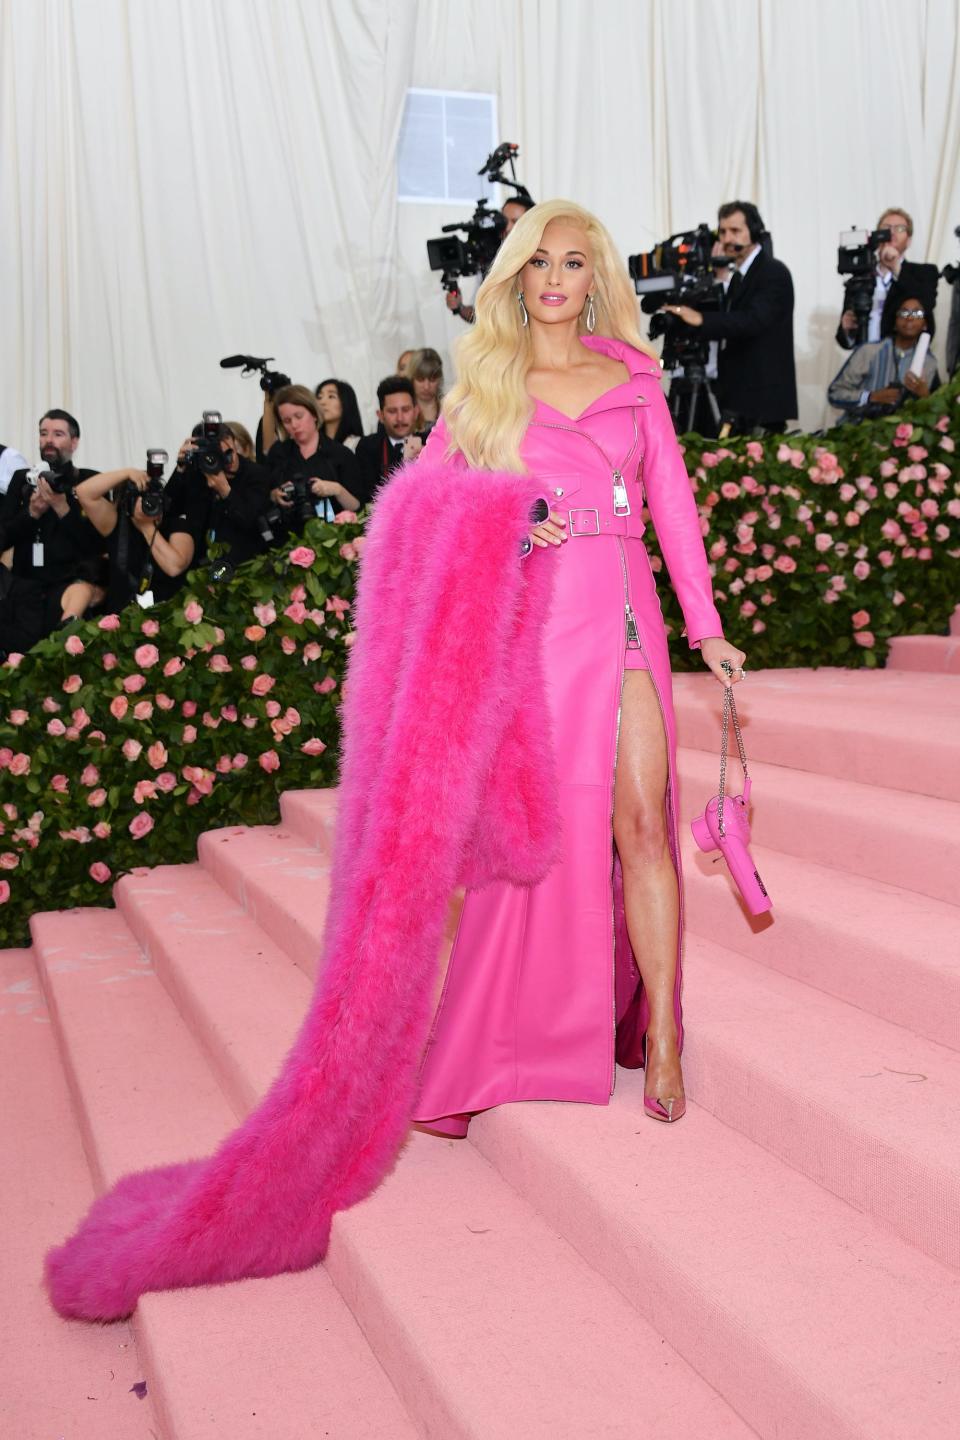 Kacey Musgraves at the 2019 Met Gala with blonde hair and in a bright pink dress with a fur stole on her arm.